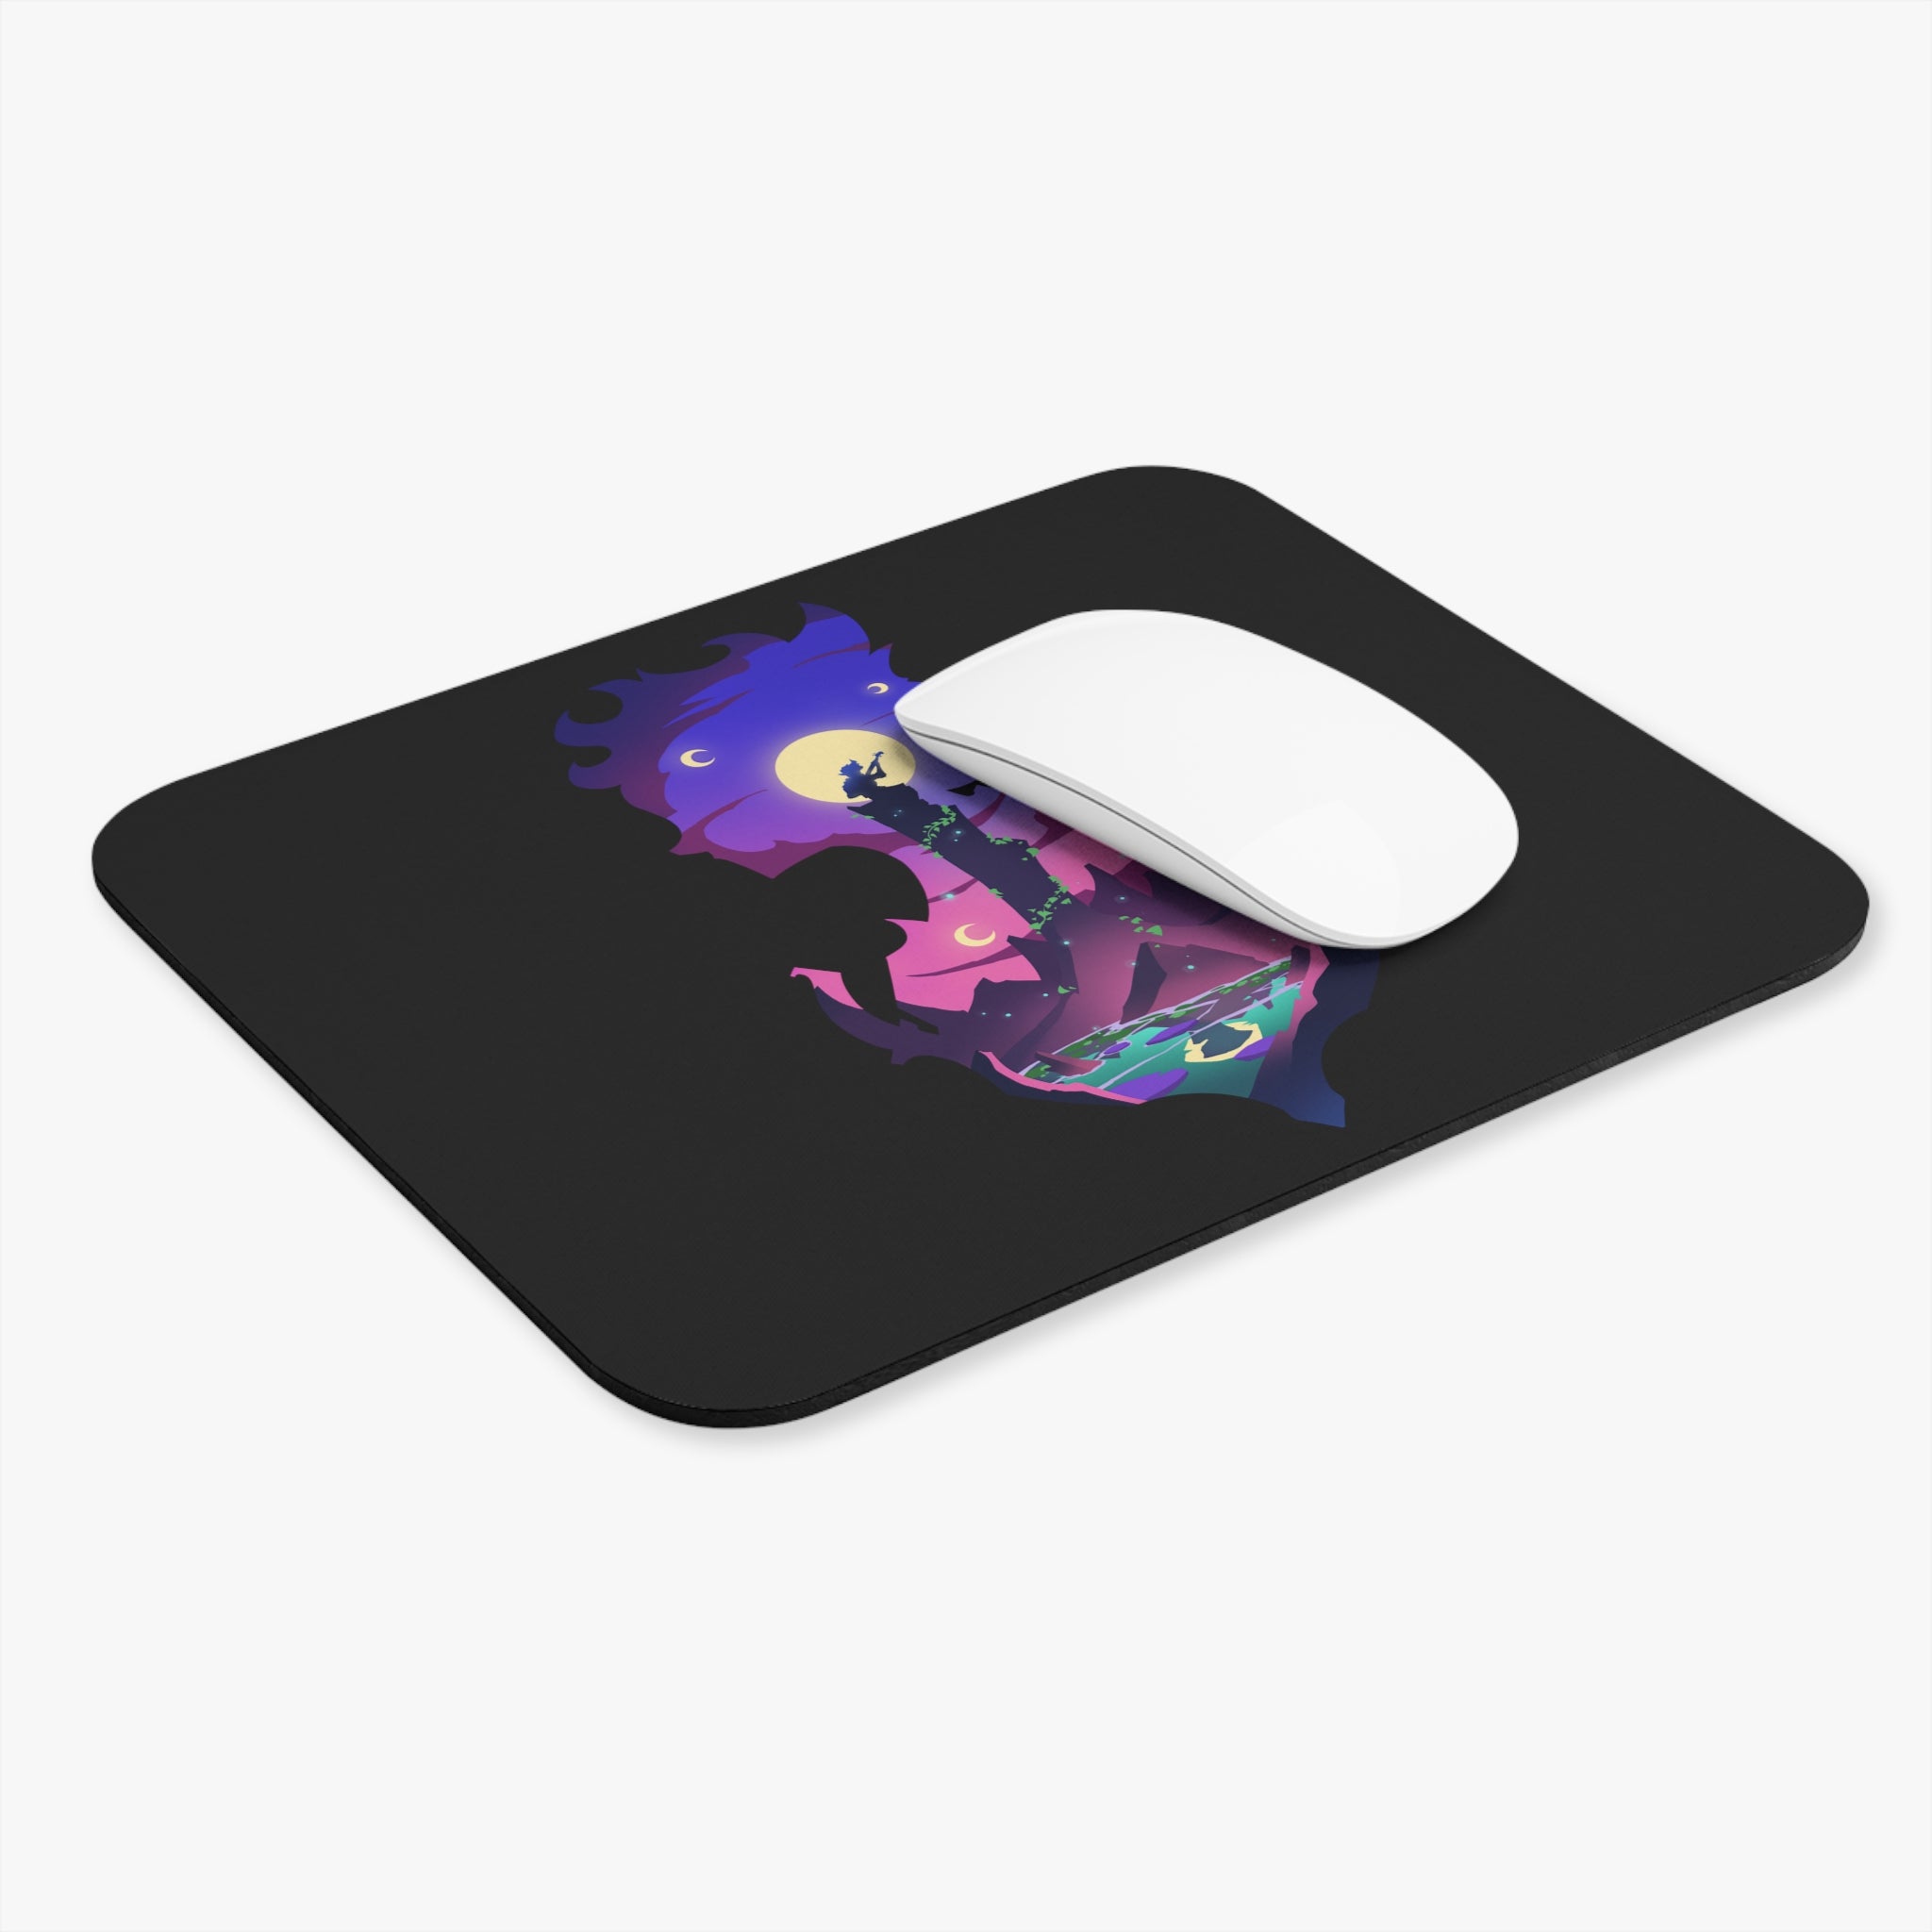 BARD CLASS SILHOUETTE RECTANGLER MOUSE PAD